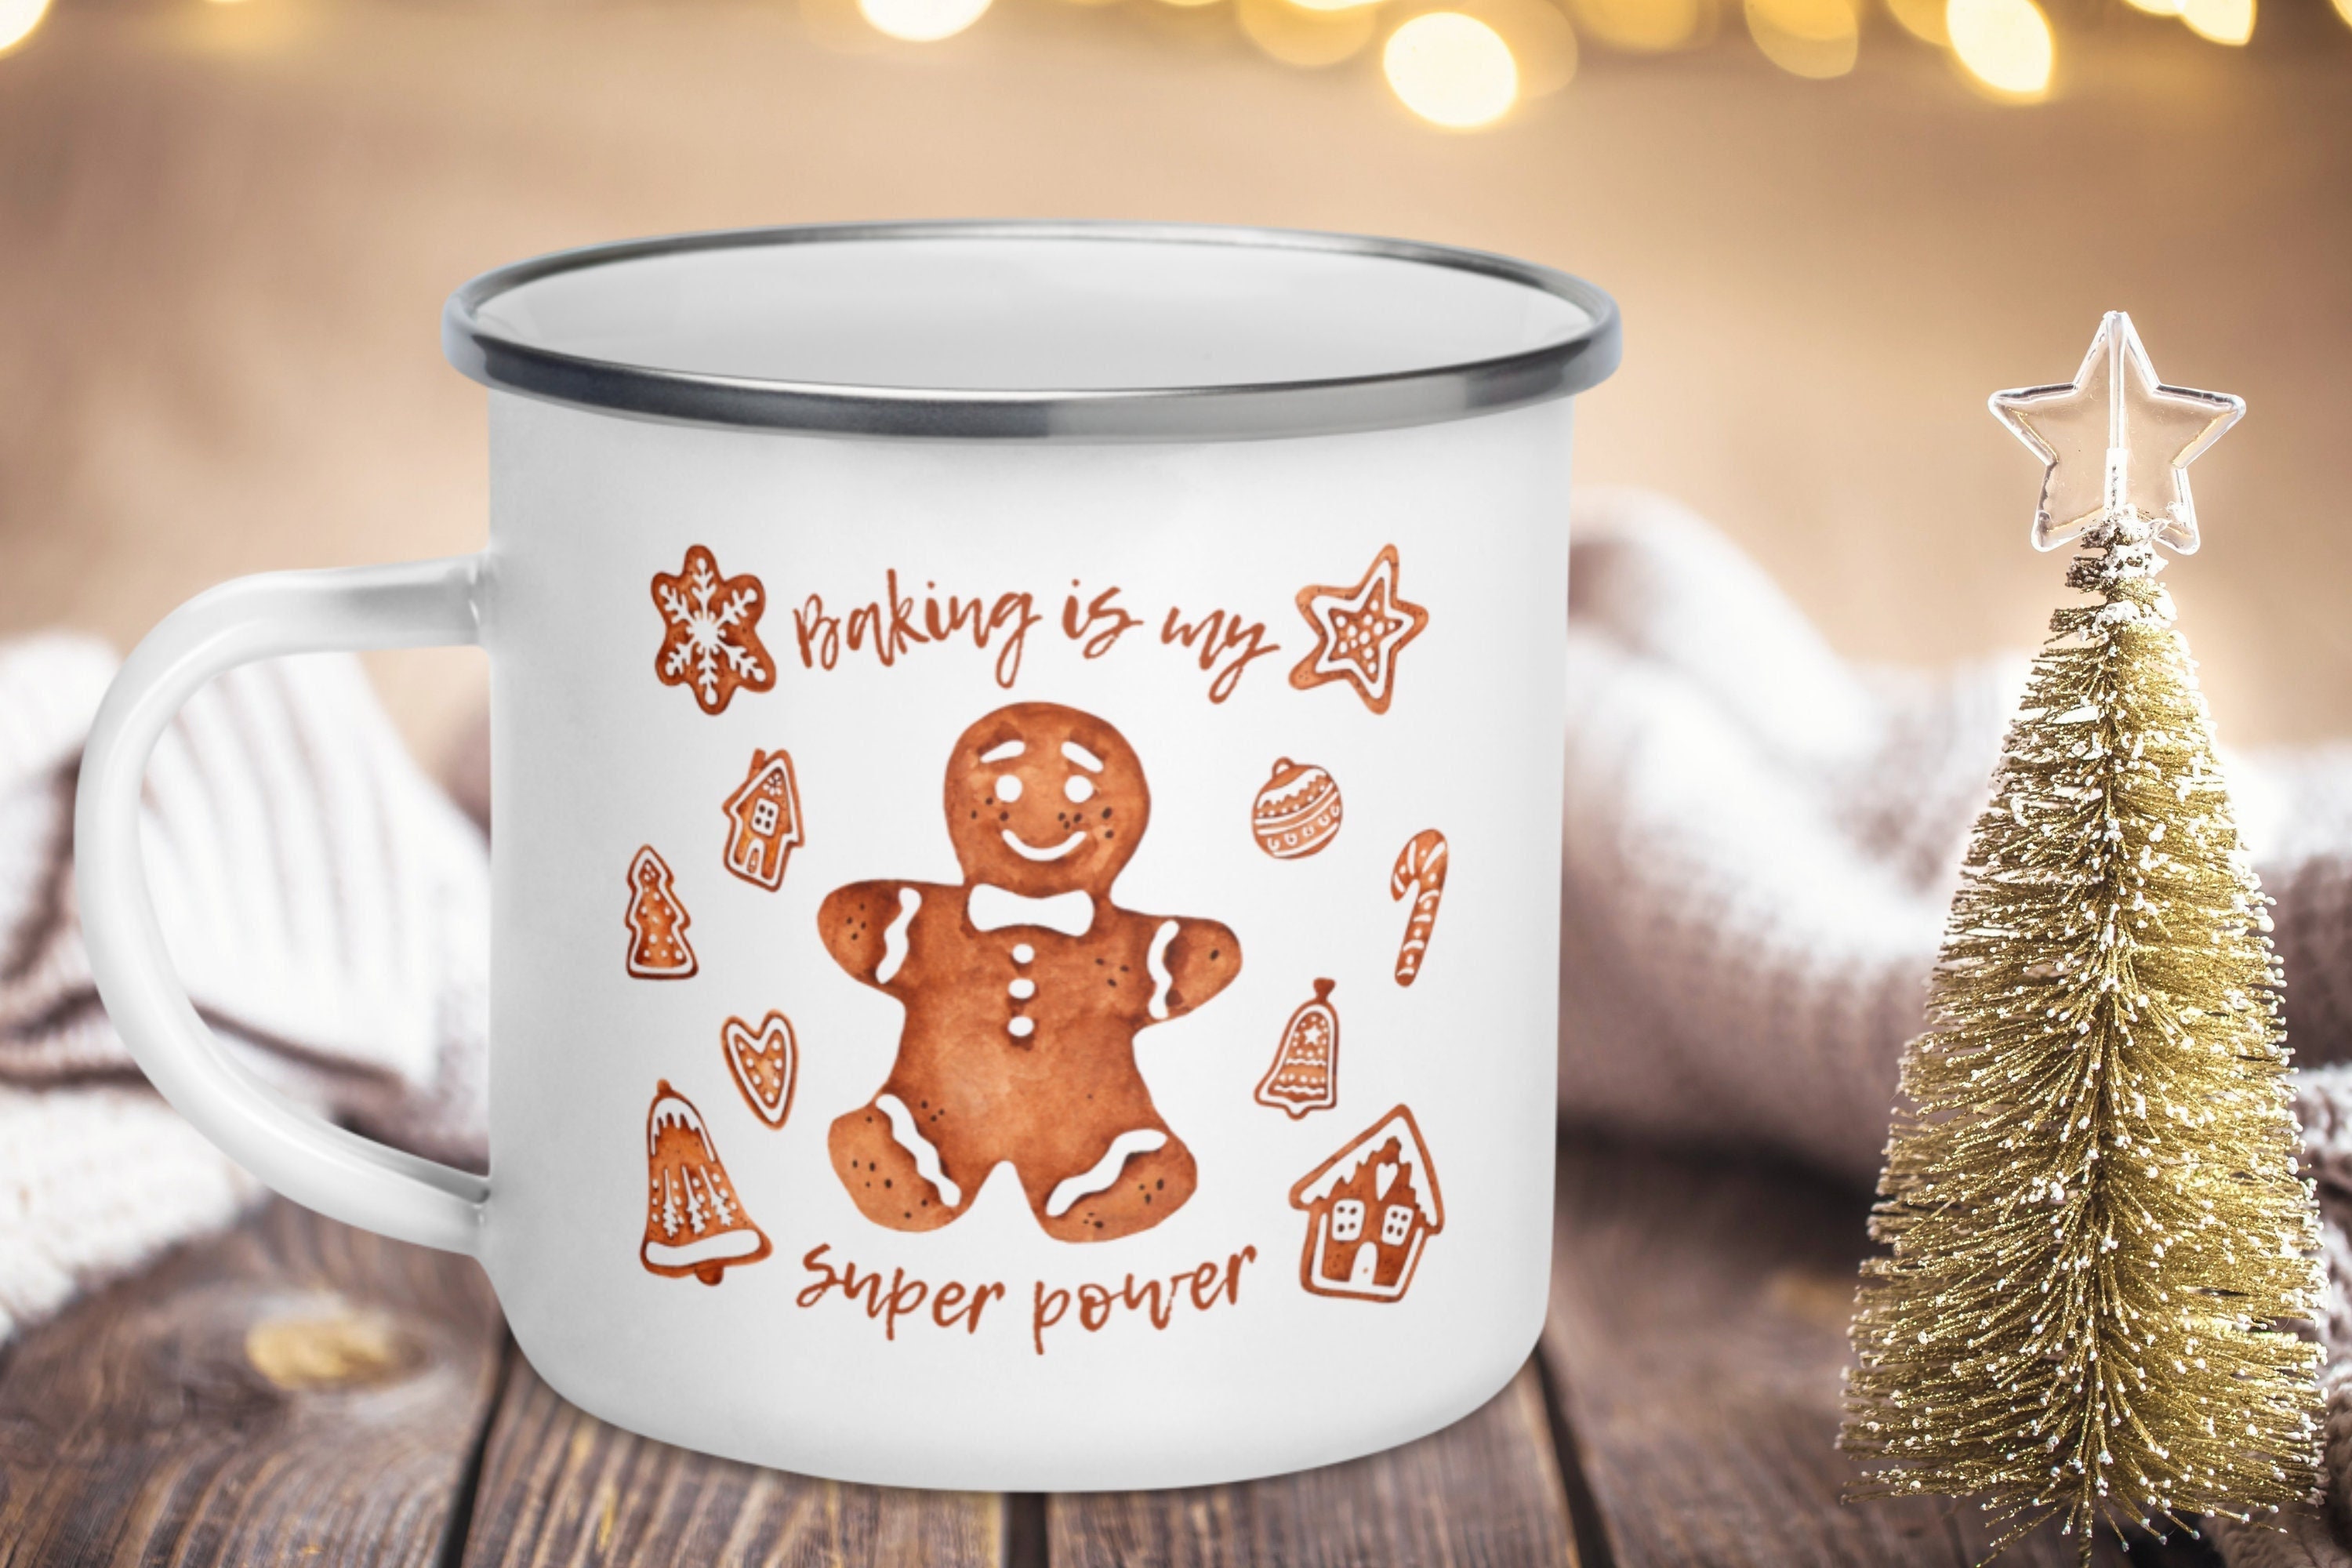  Gingerbread Man Christmas Coffee Mug Ceramic Mug with Colorful  Handle Microwave Safe Cute Aesthetic Mugs for Women and Teen Girls Warm  Winter Holiday Unique Christmas Gifts Home Office (Red Bowknot) 